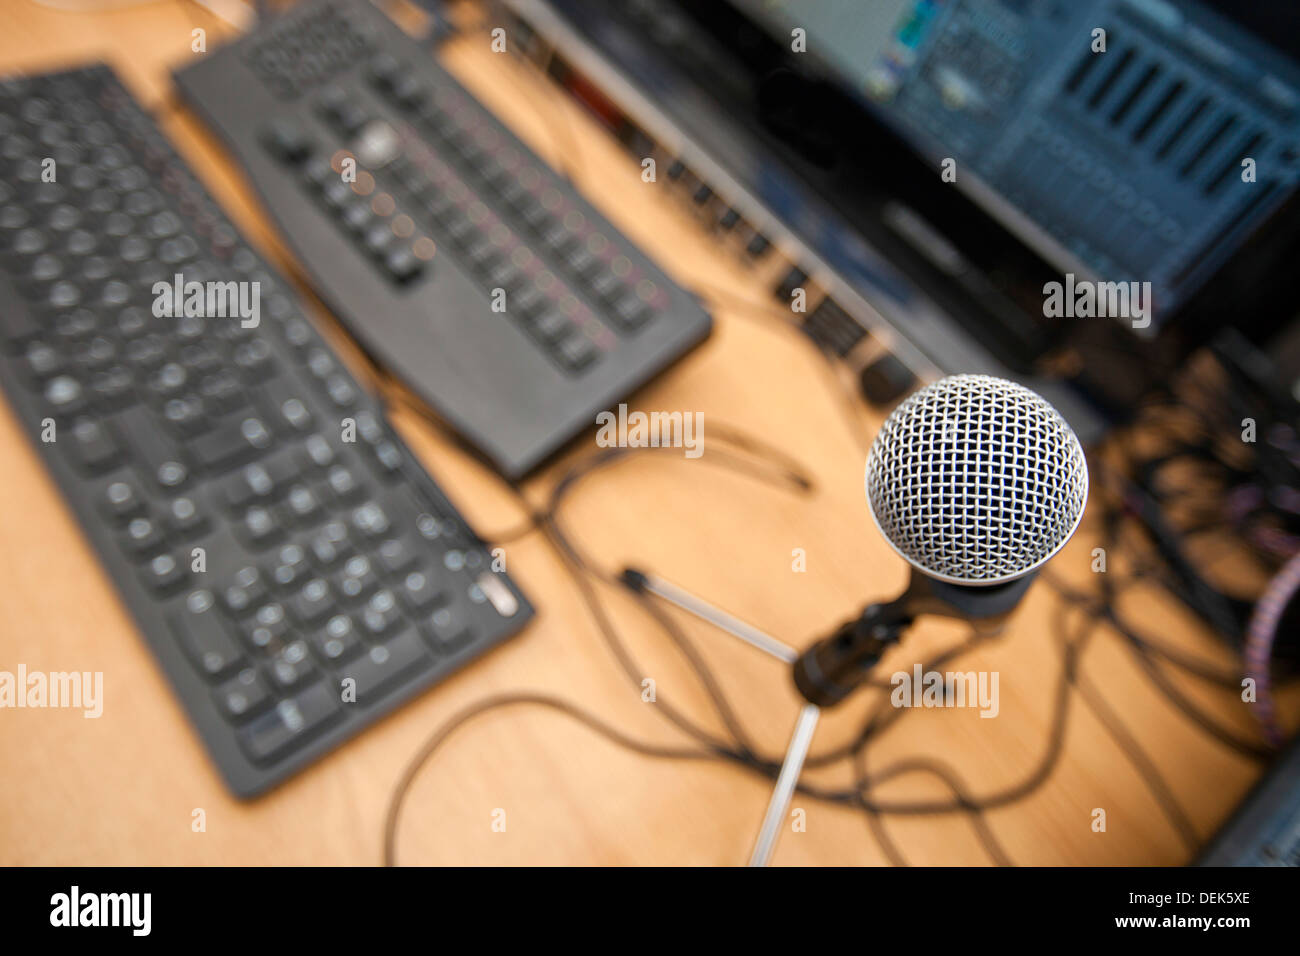 Microphone computer keyboards on table television studio Stock Photo